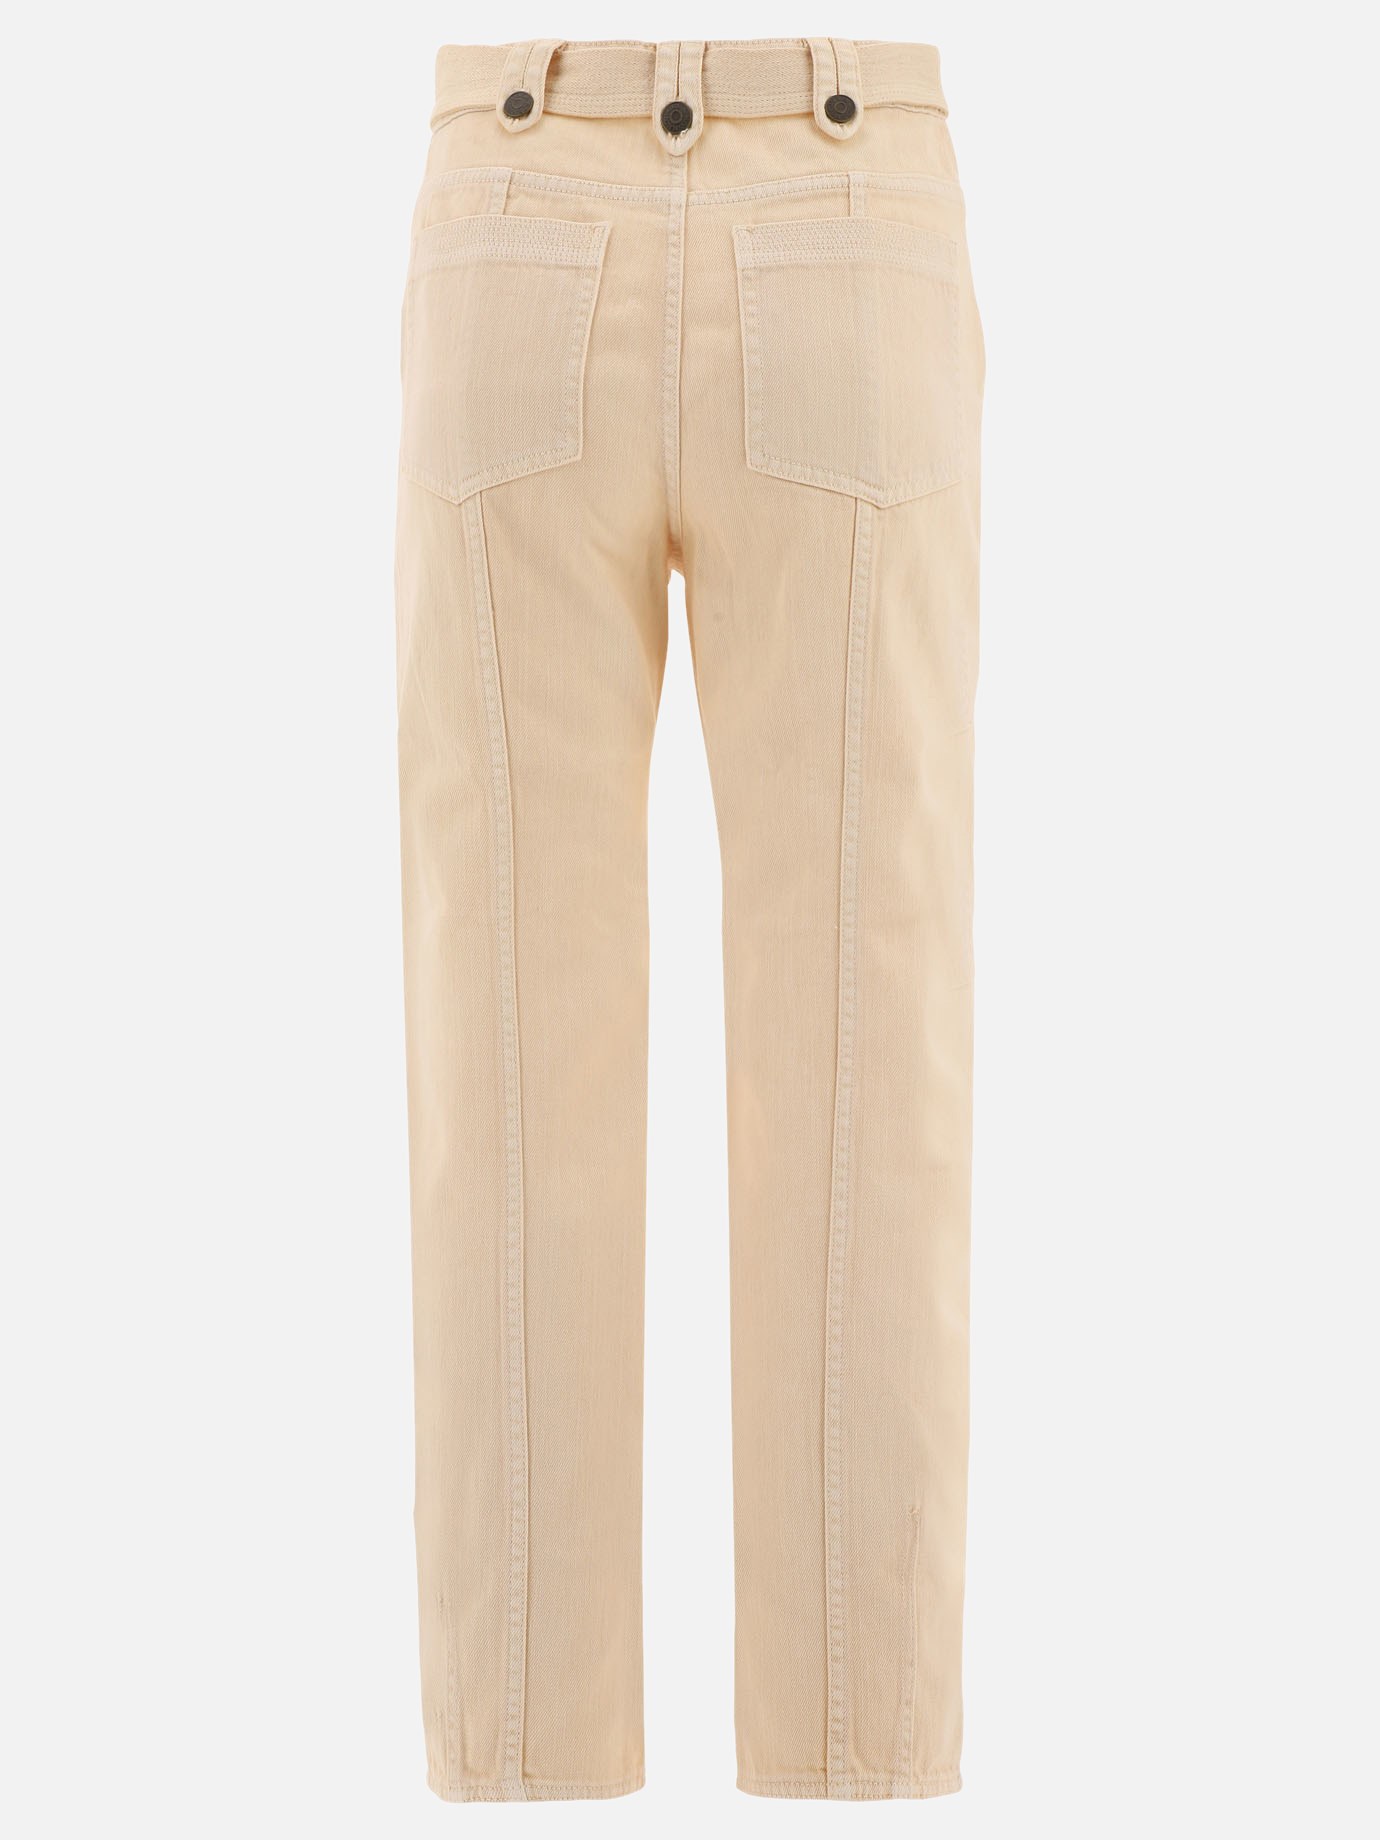  Waverly  trousers by Ulla Johnson